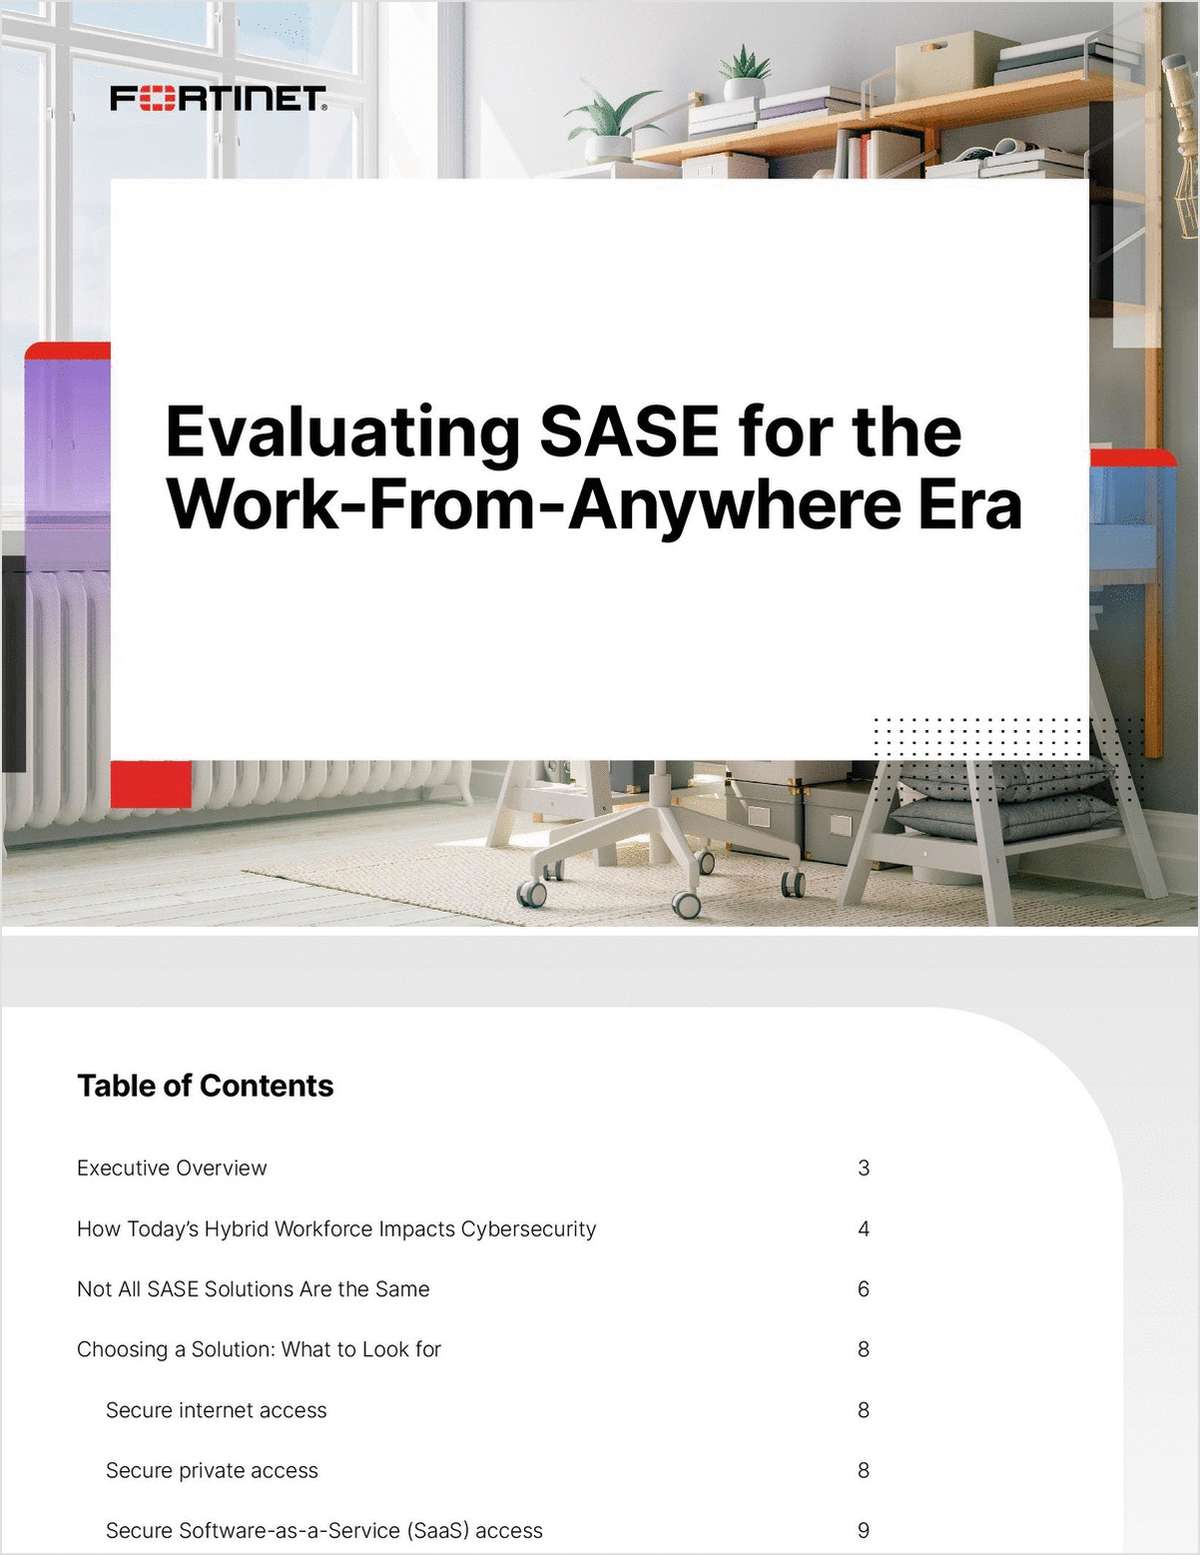 Evaluating SASE for the Work-From-Anywhere Era